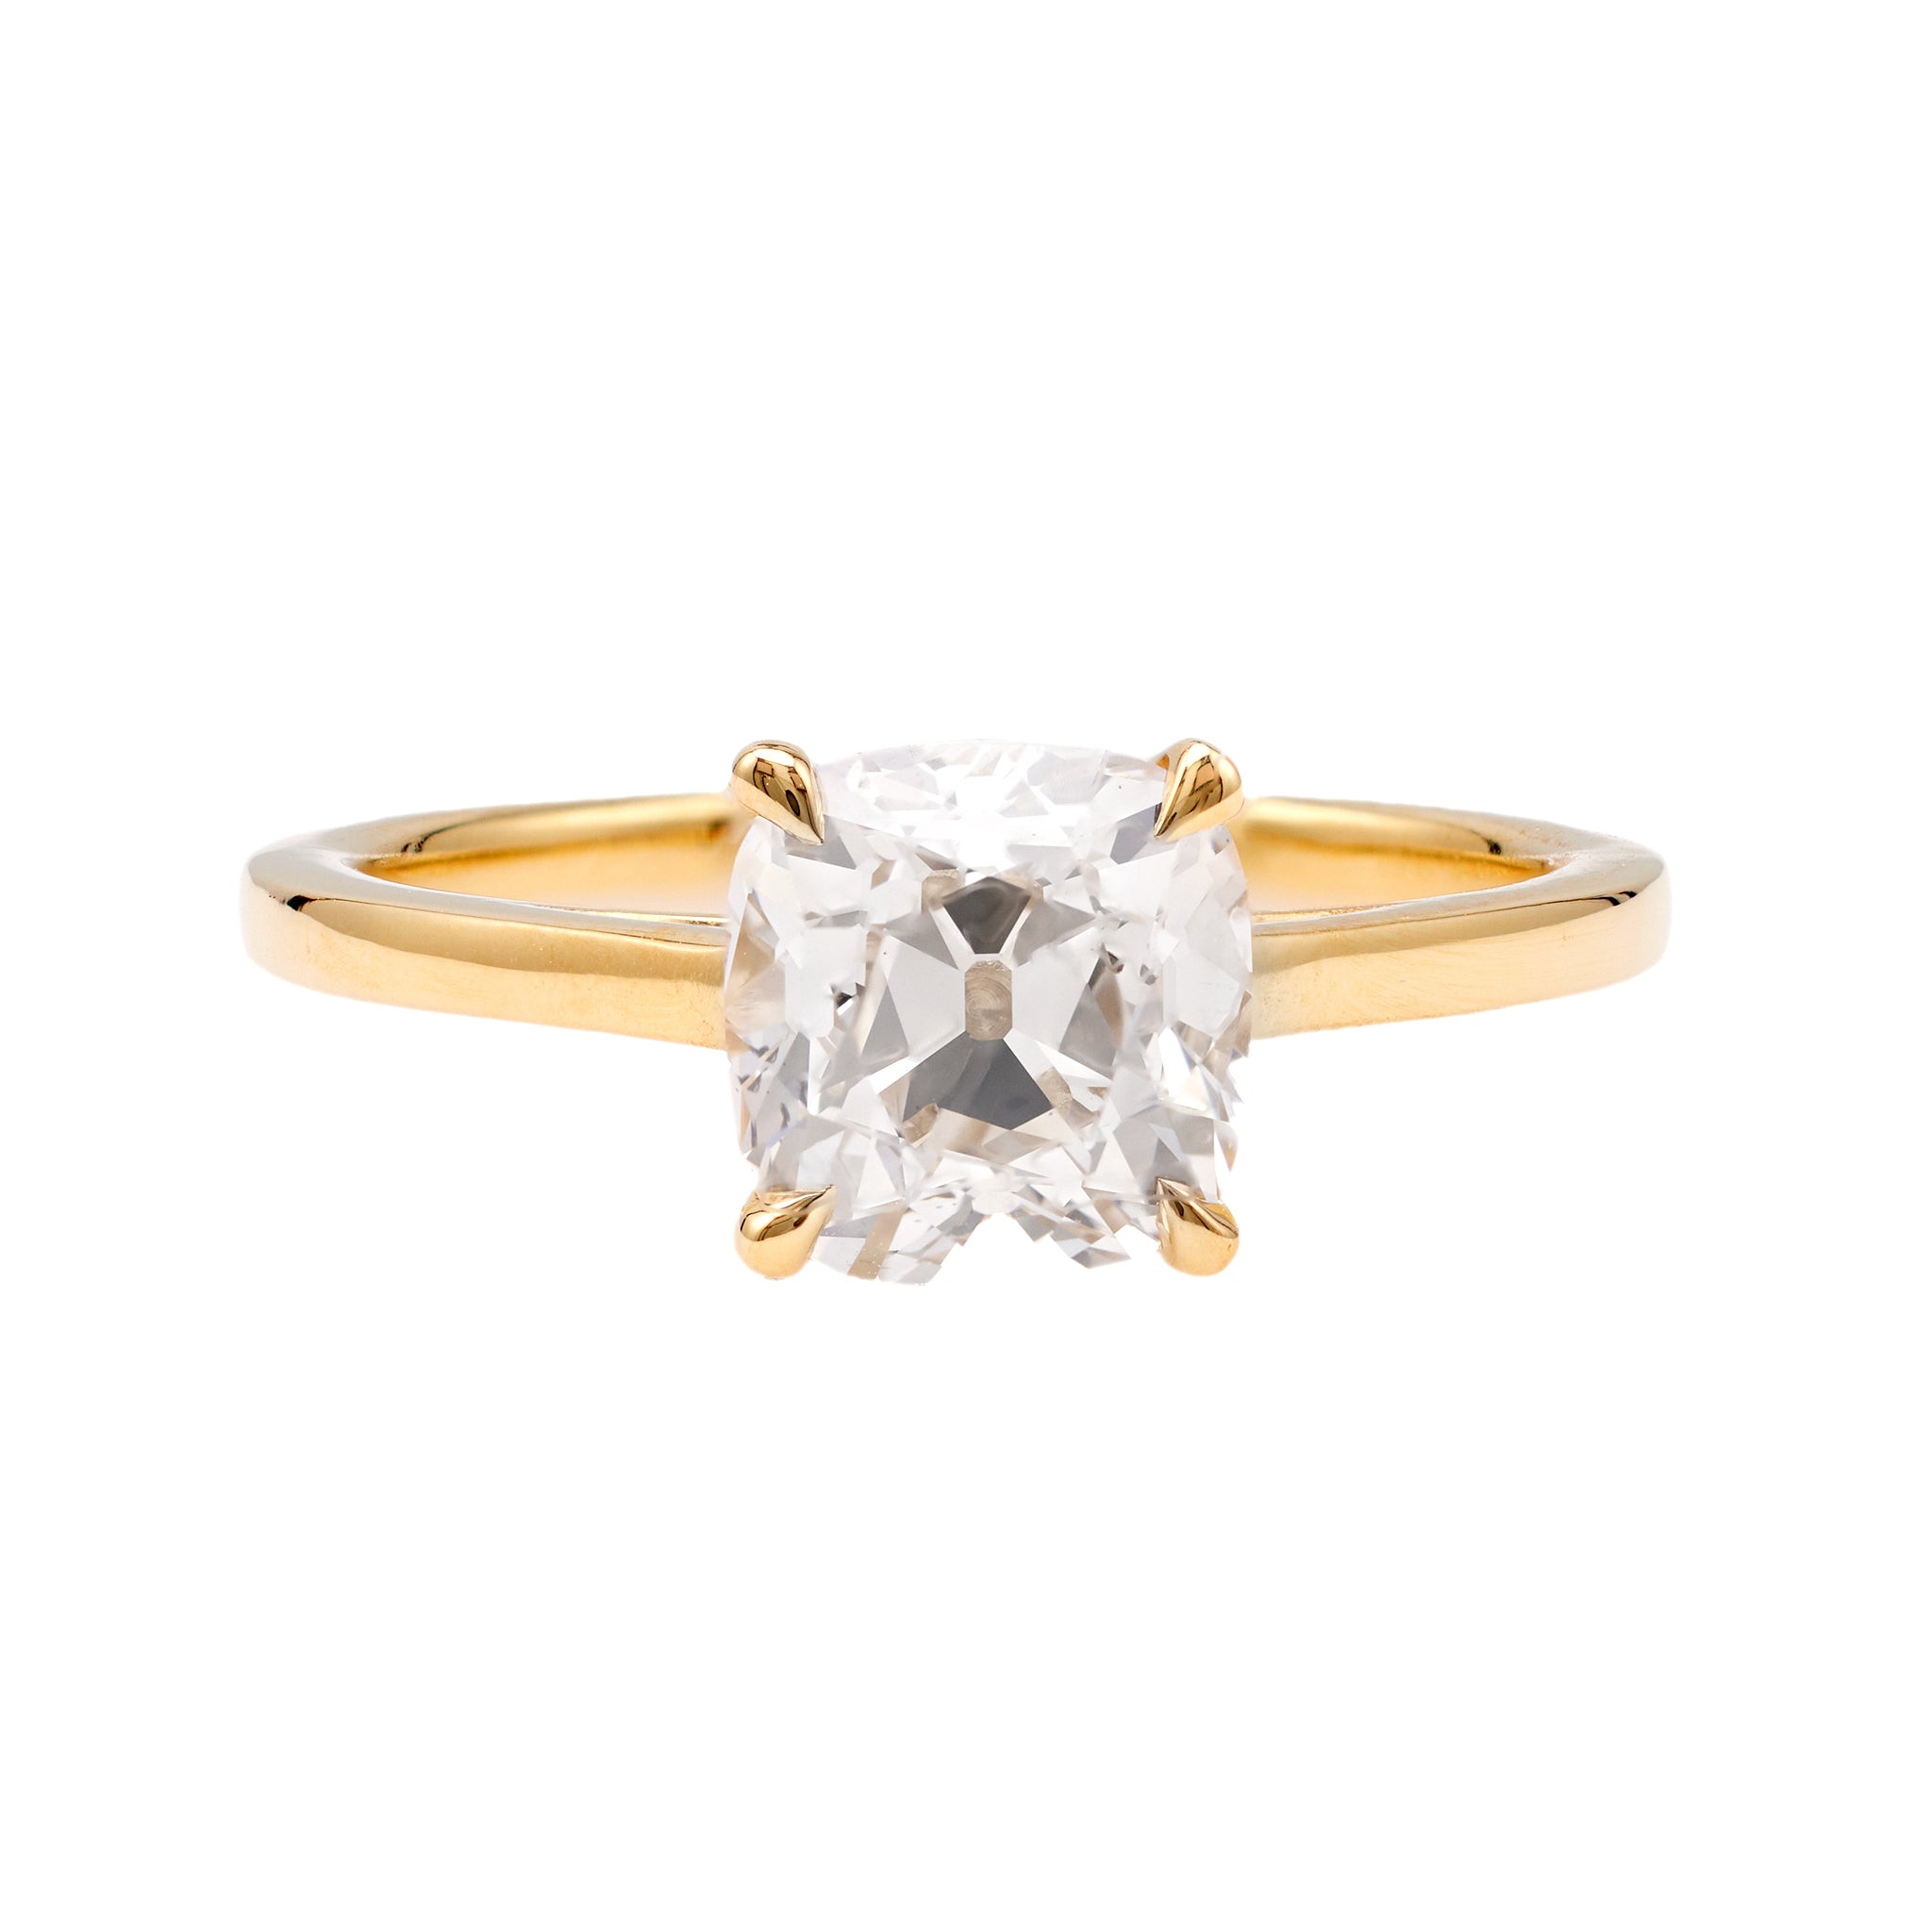 GIA 1.83 Carat Old Mine Cut Diamond 18k Yellow Gold Solitaire Ring